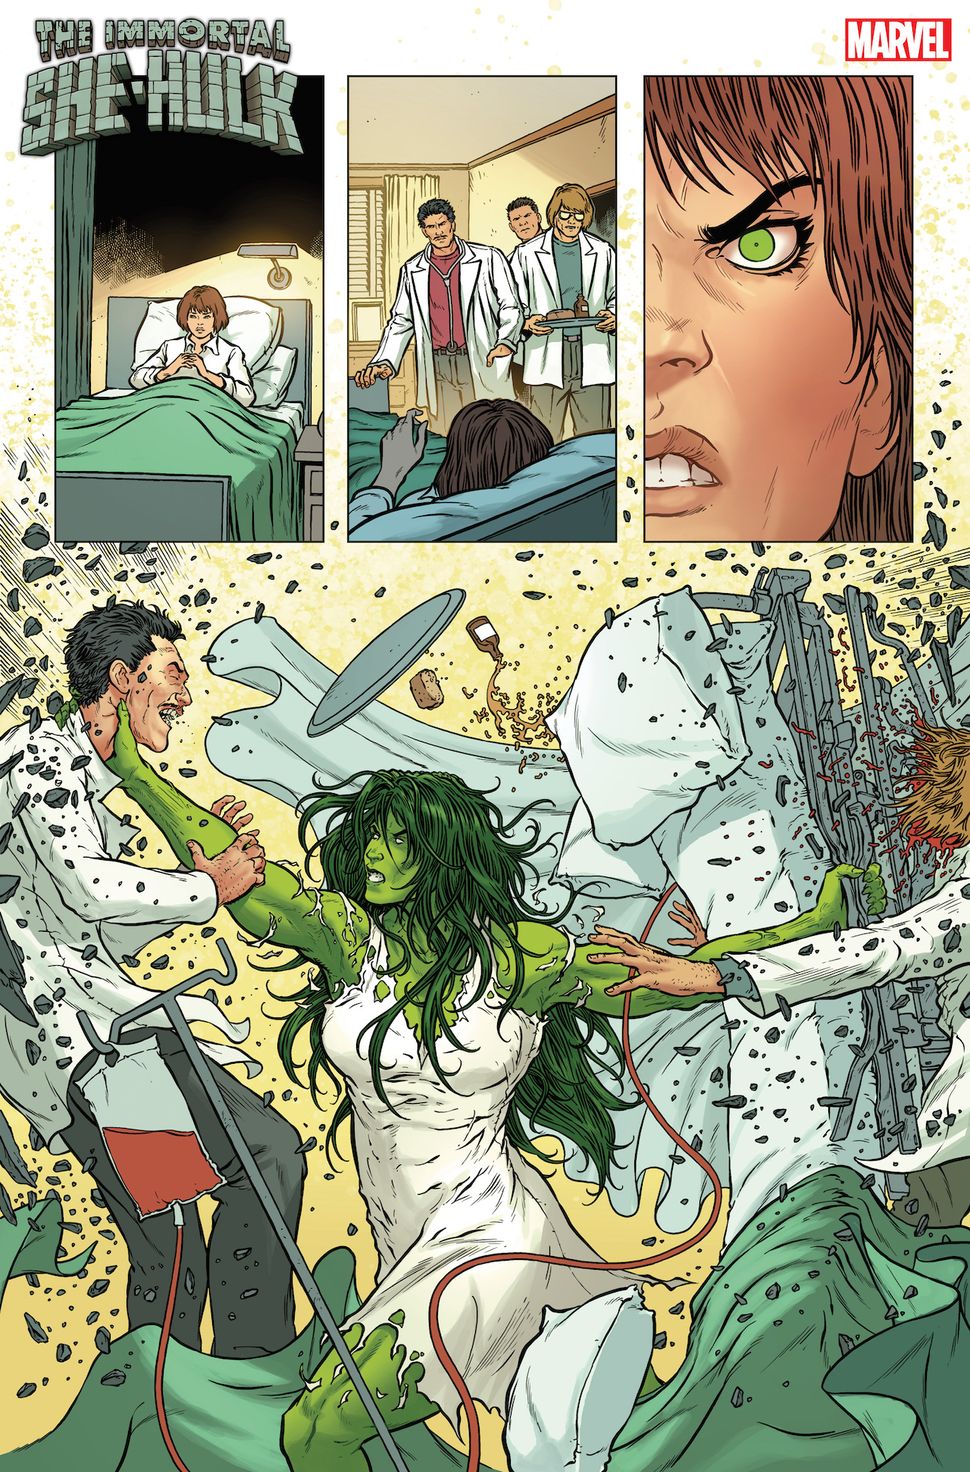 Immortal She Hulk Gives Jennifer Walters A New Understanding Of Being A